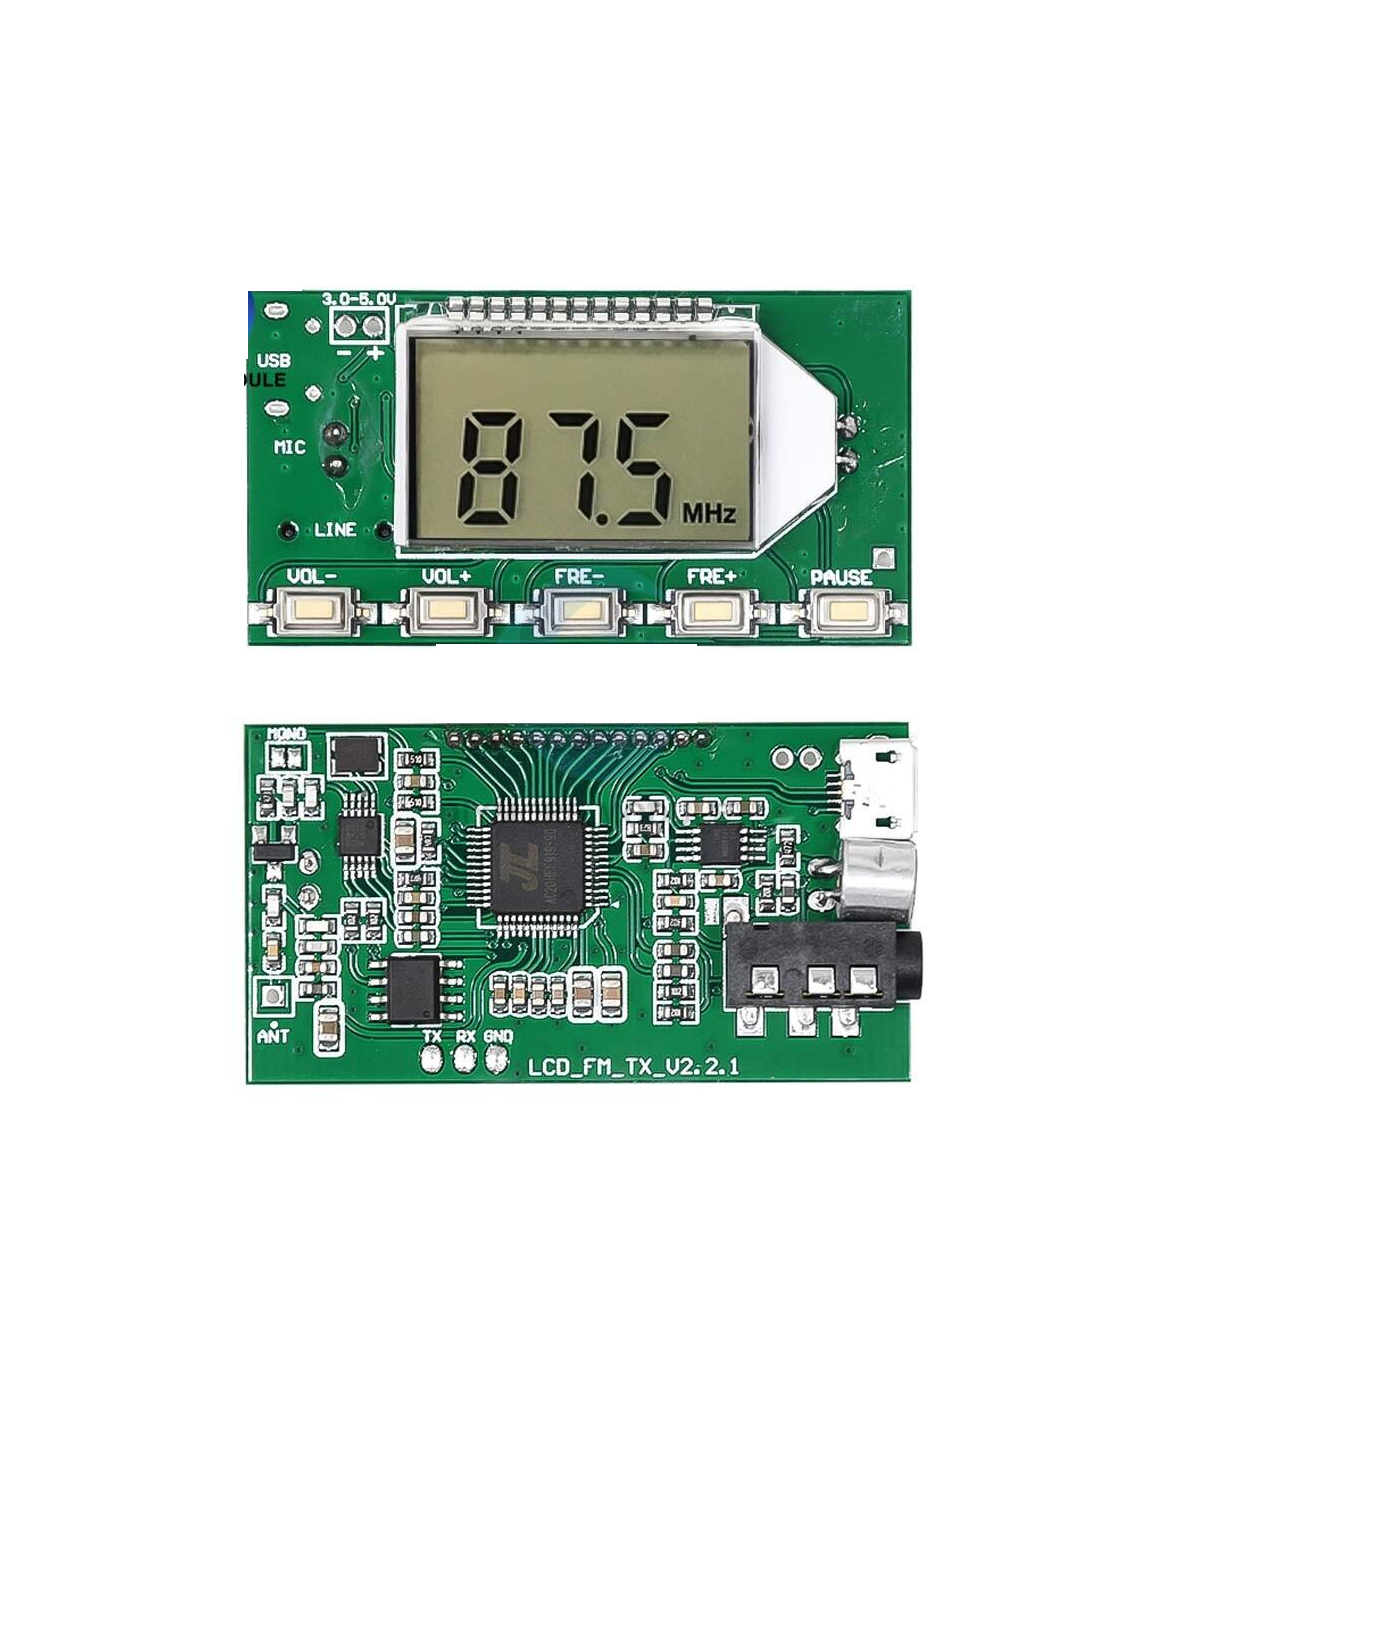 Buy DSP PLL 87-108Mhz Stereo FM Transmitter Module Digital LCD Display  Online at